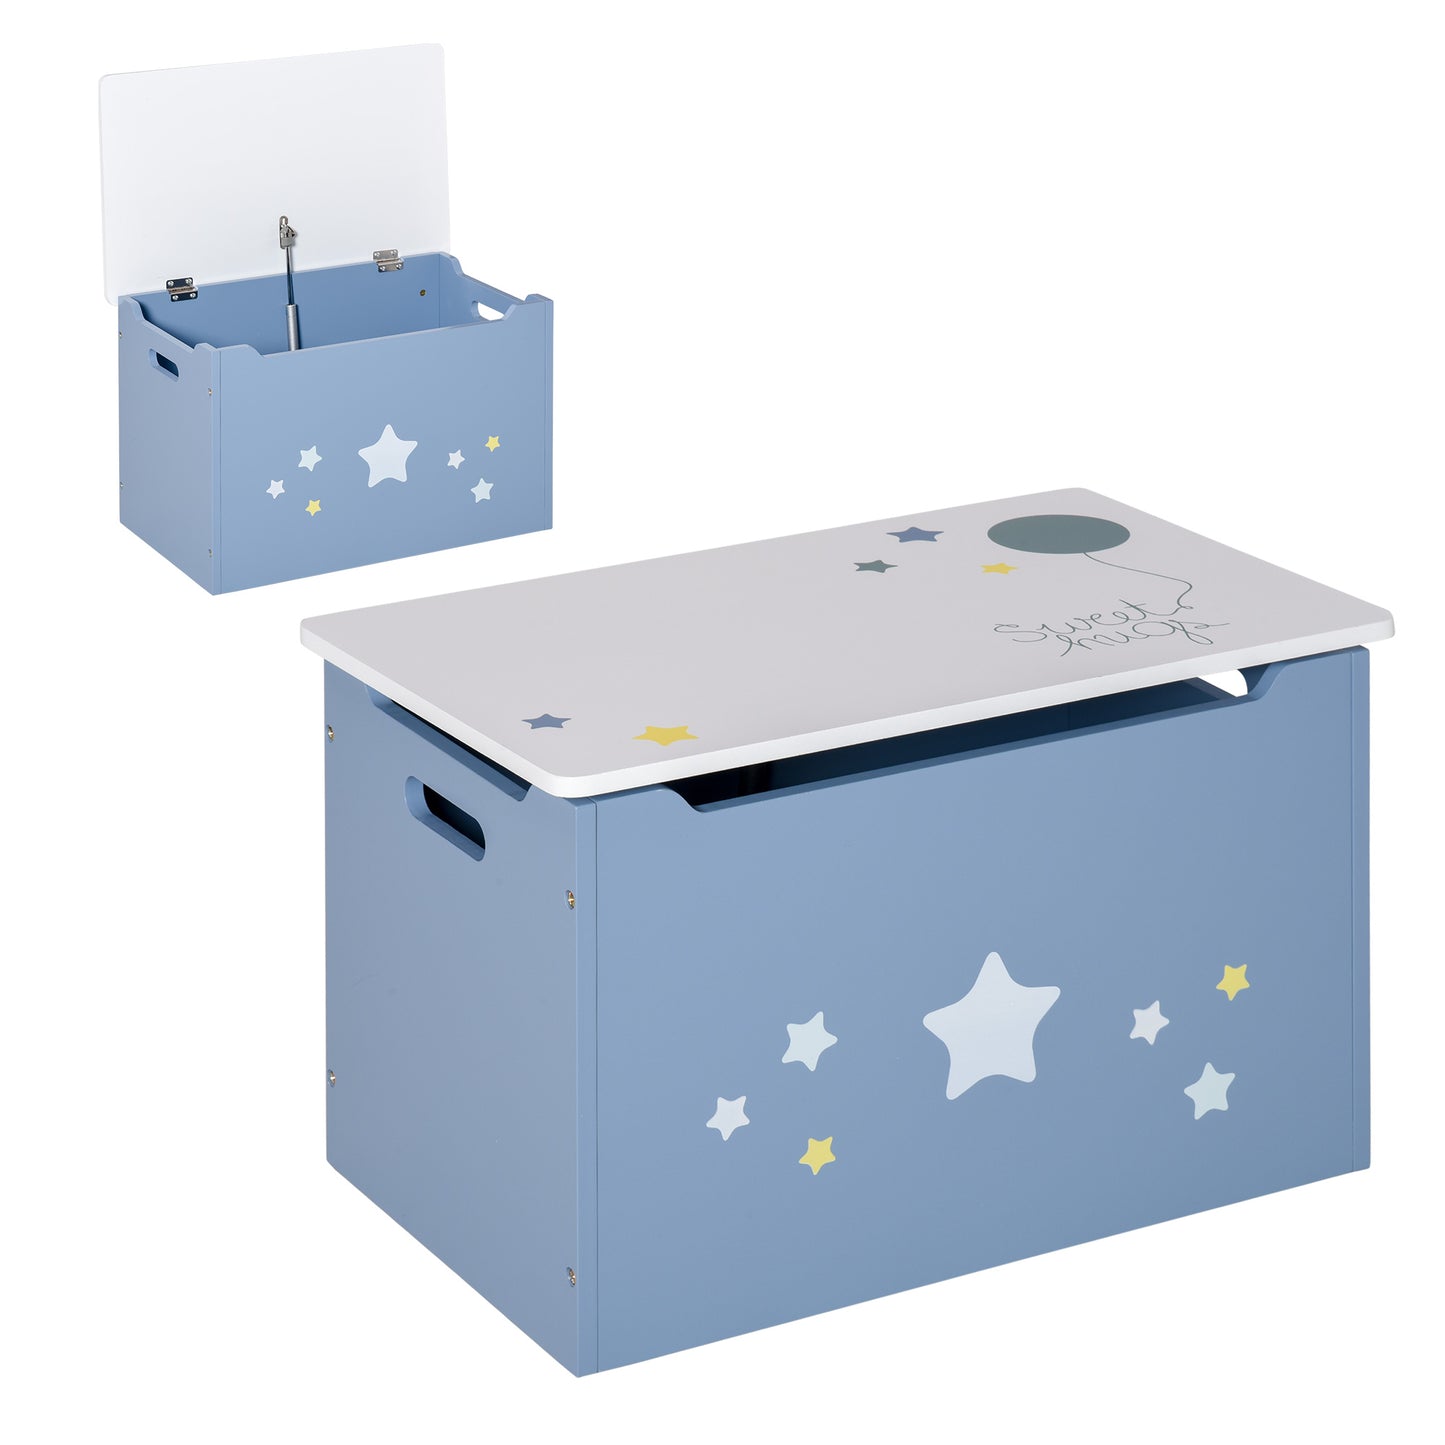 HOMCOM Kids Wooden Toy Storage Box Chest Star Decor with Gas Stay Bar Seating Bench